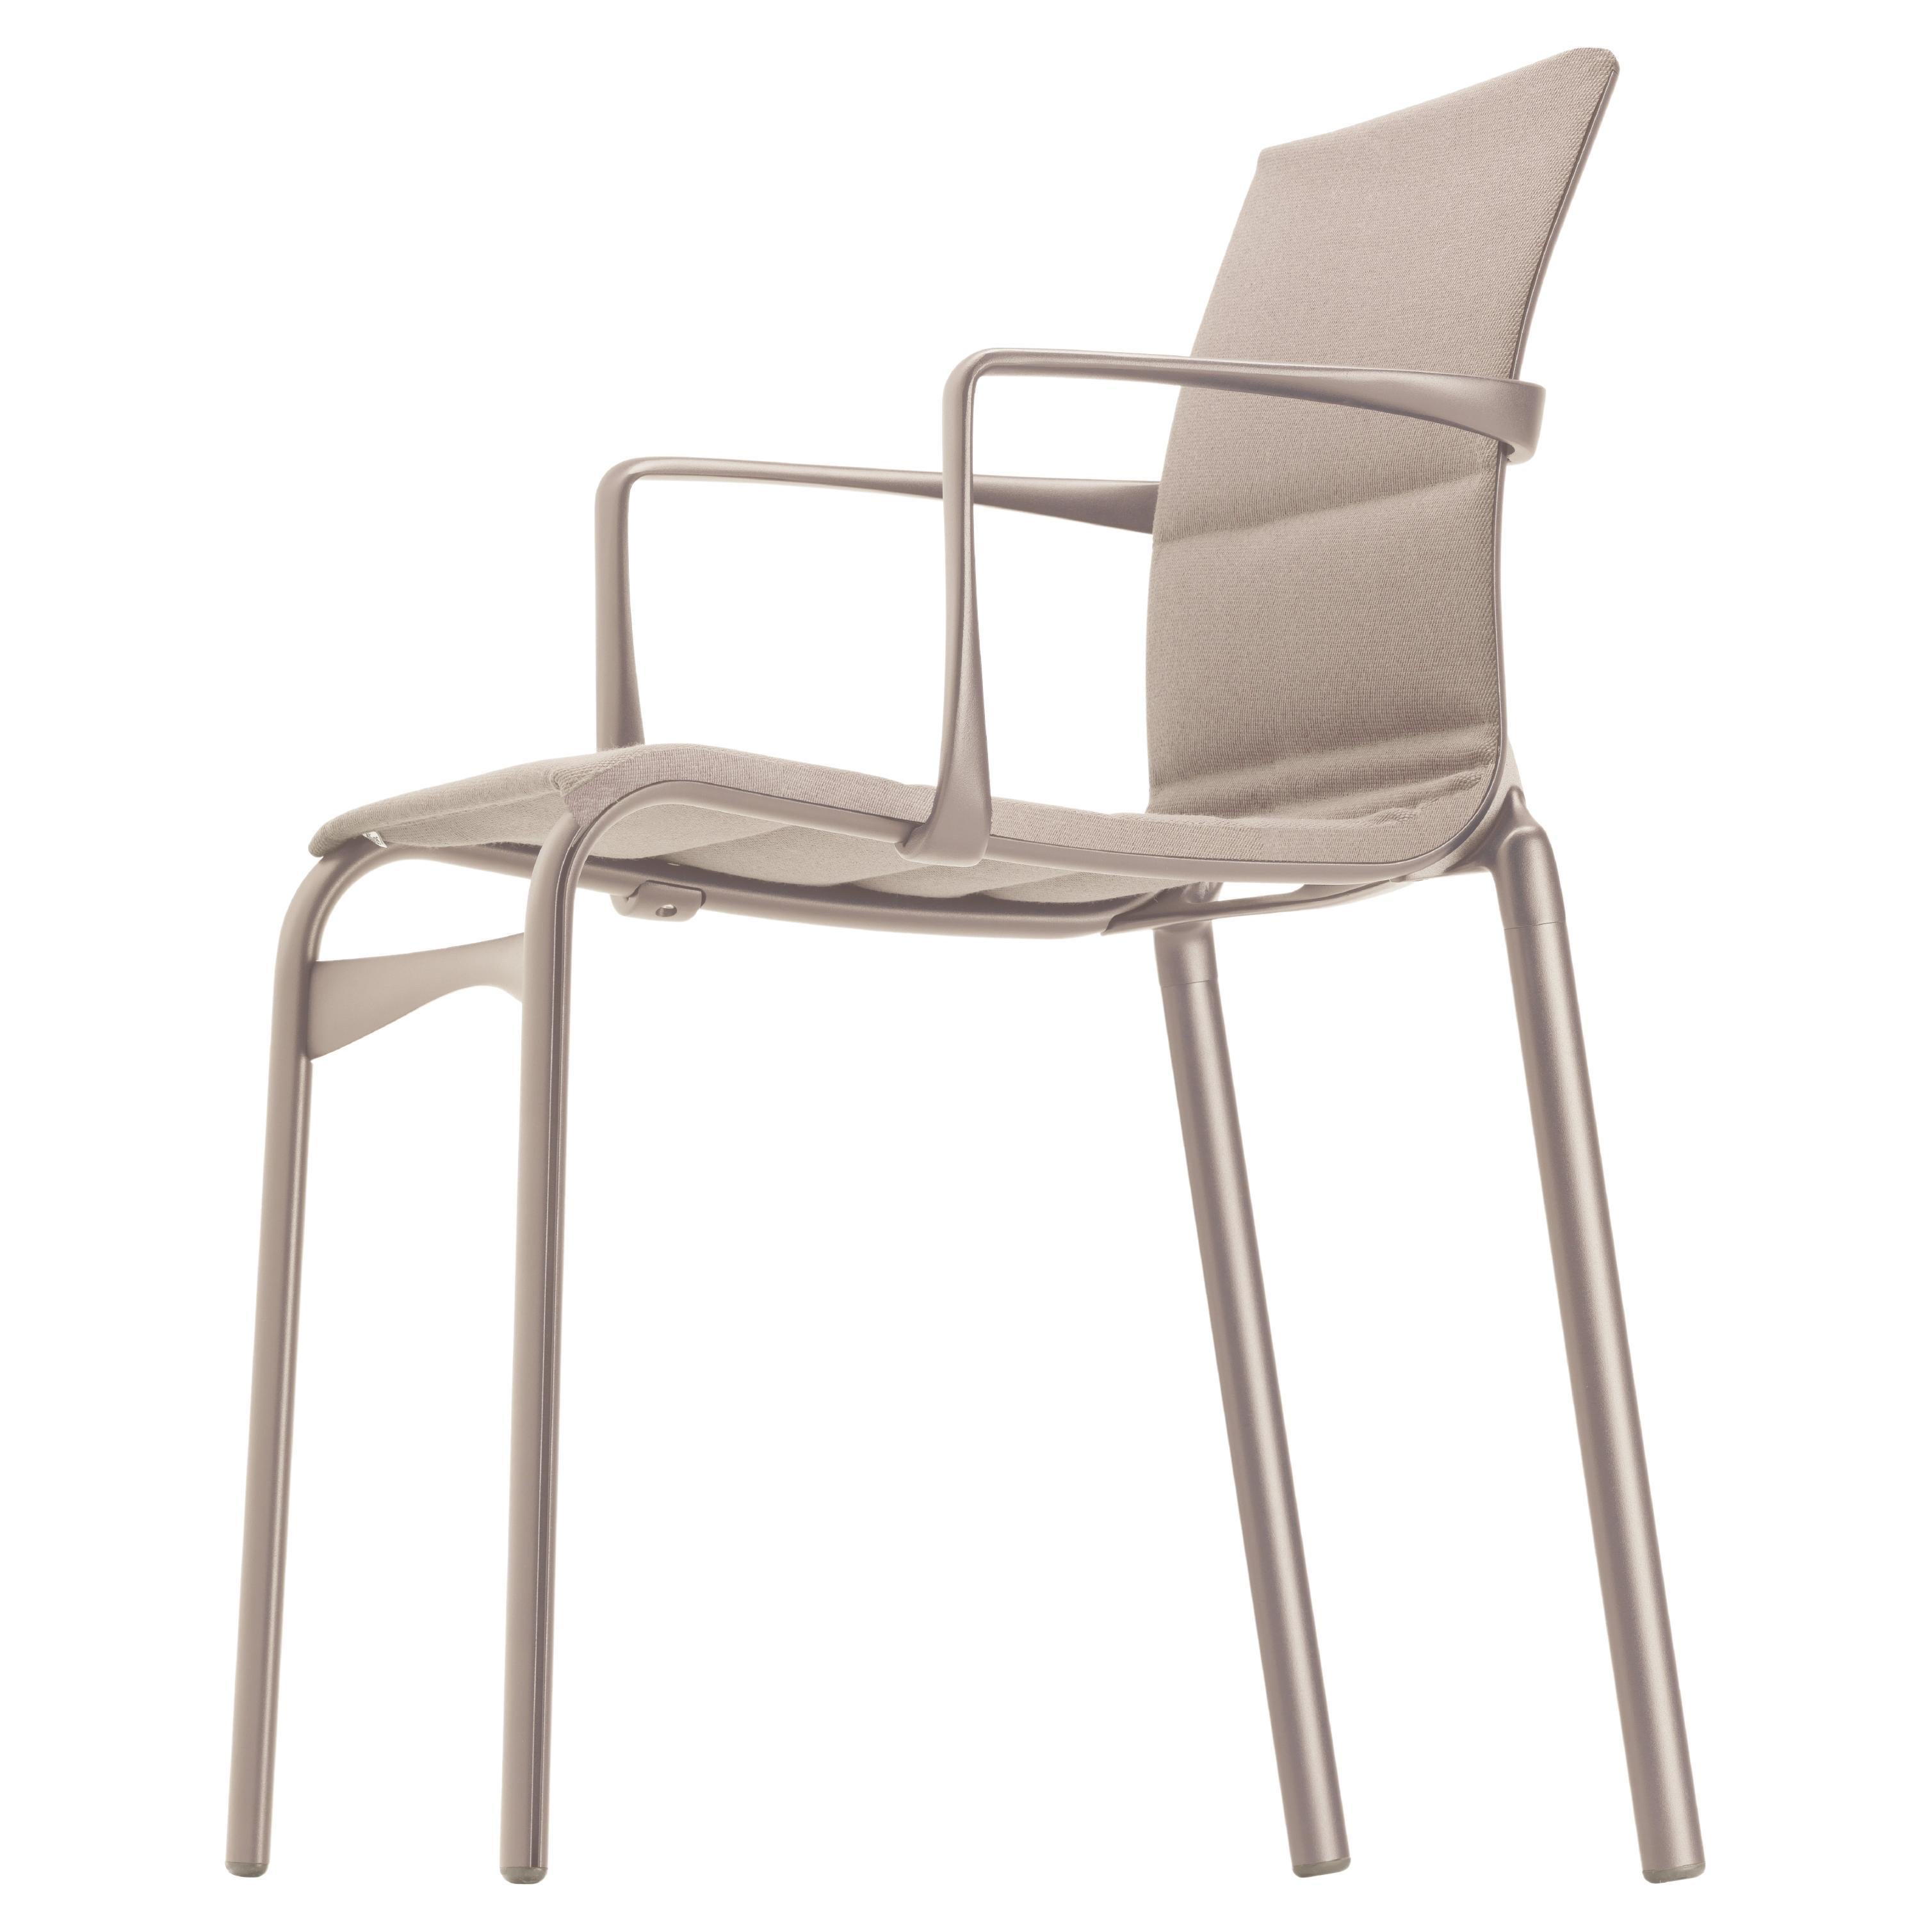 Alias 417 Highframe 40 Chair in Beige Seat with Sand Lacquered Aluminium Frame